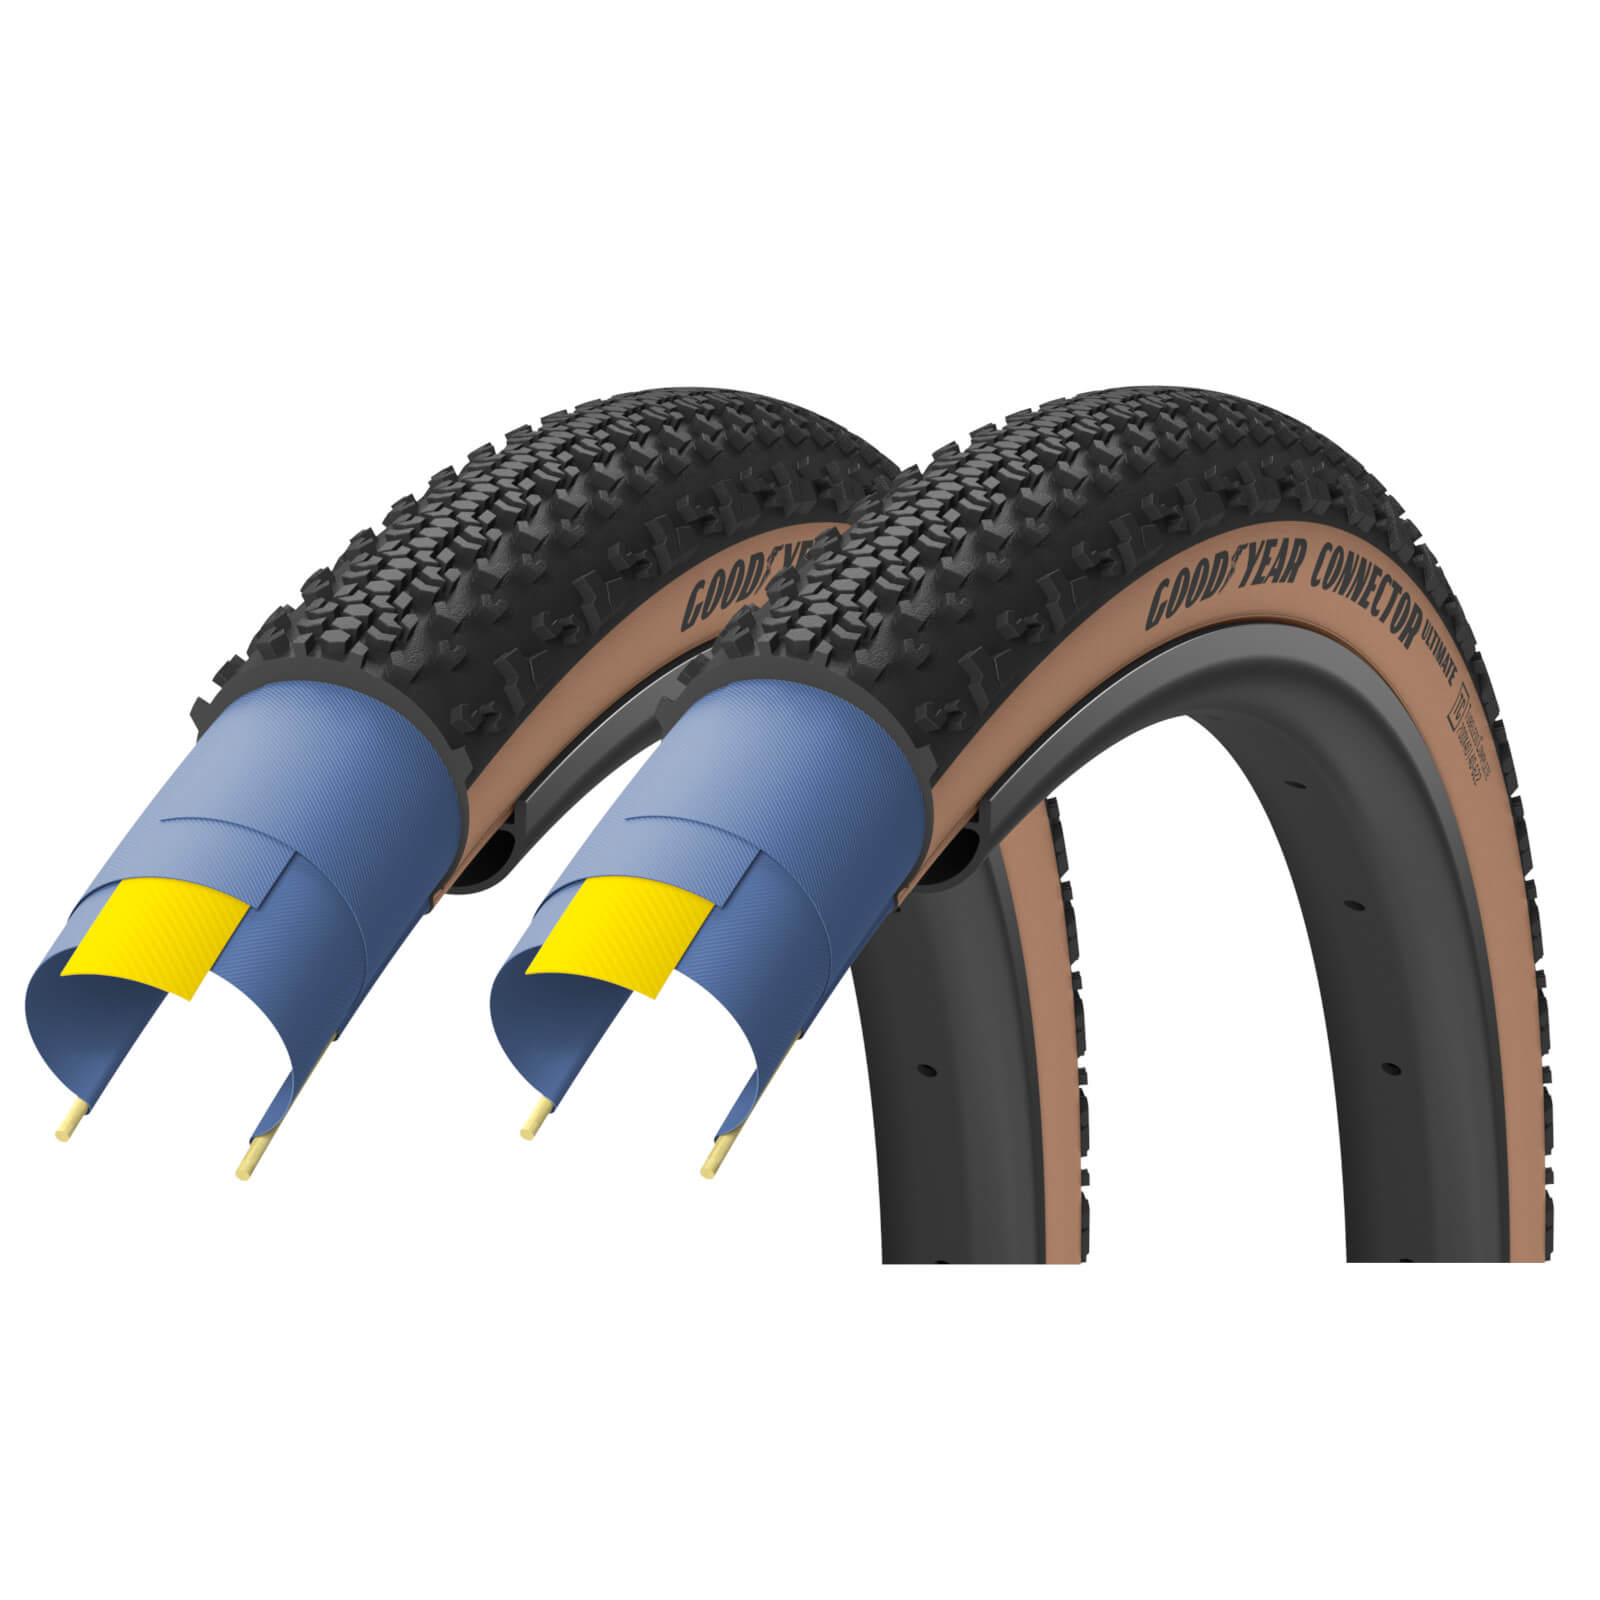 Goodyear Connector Ultimate A/T Tubeless Gravel Tyre Twin Pack - 700c x 50mm - Tan